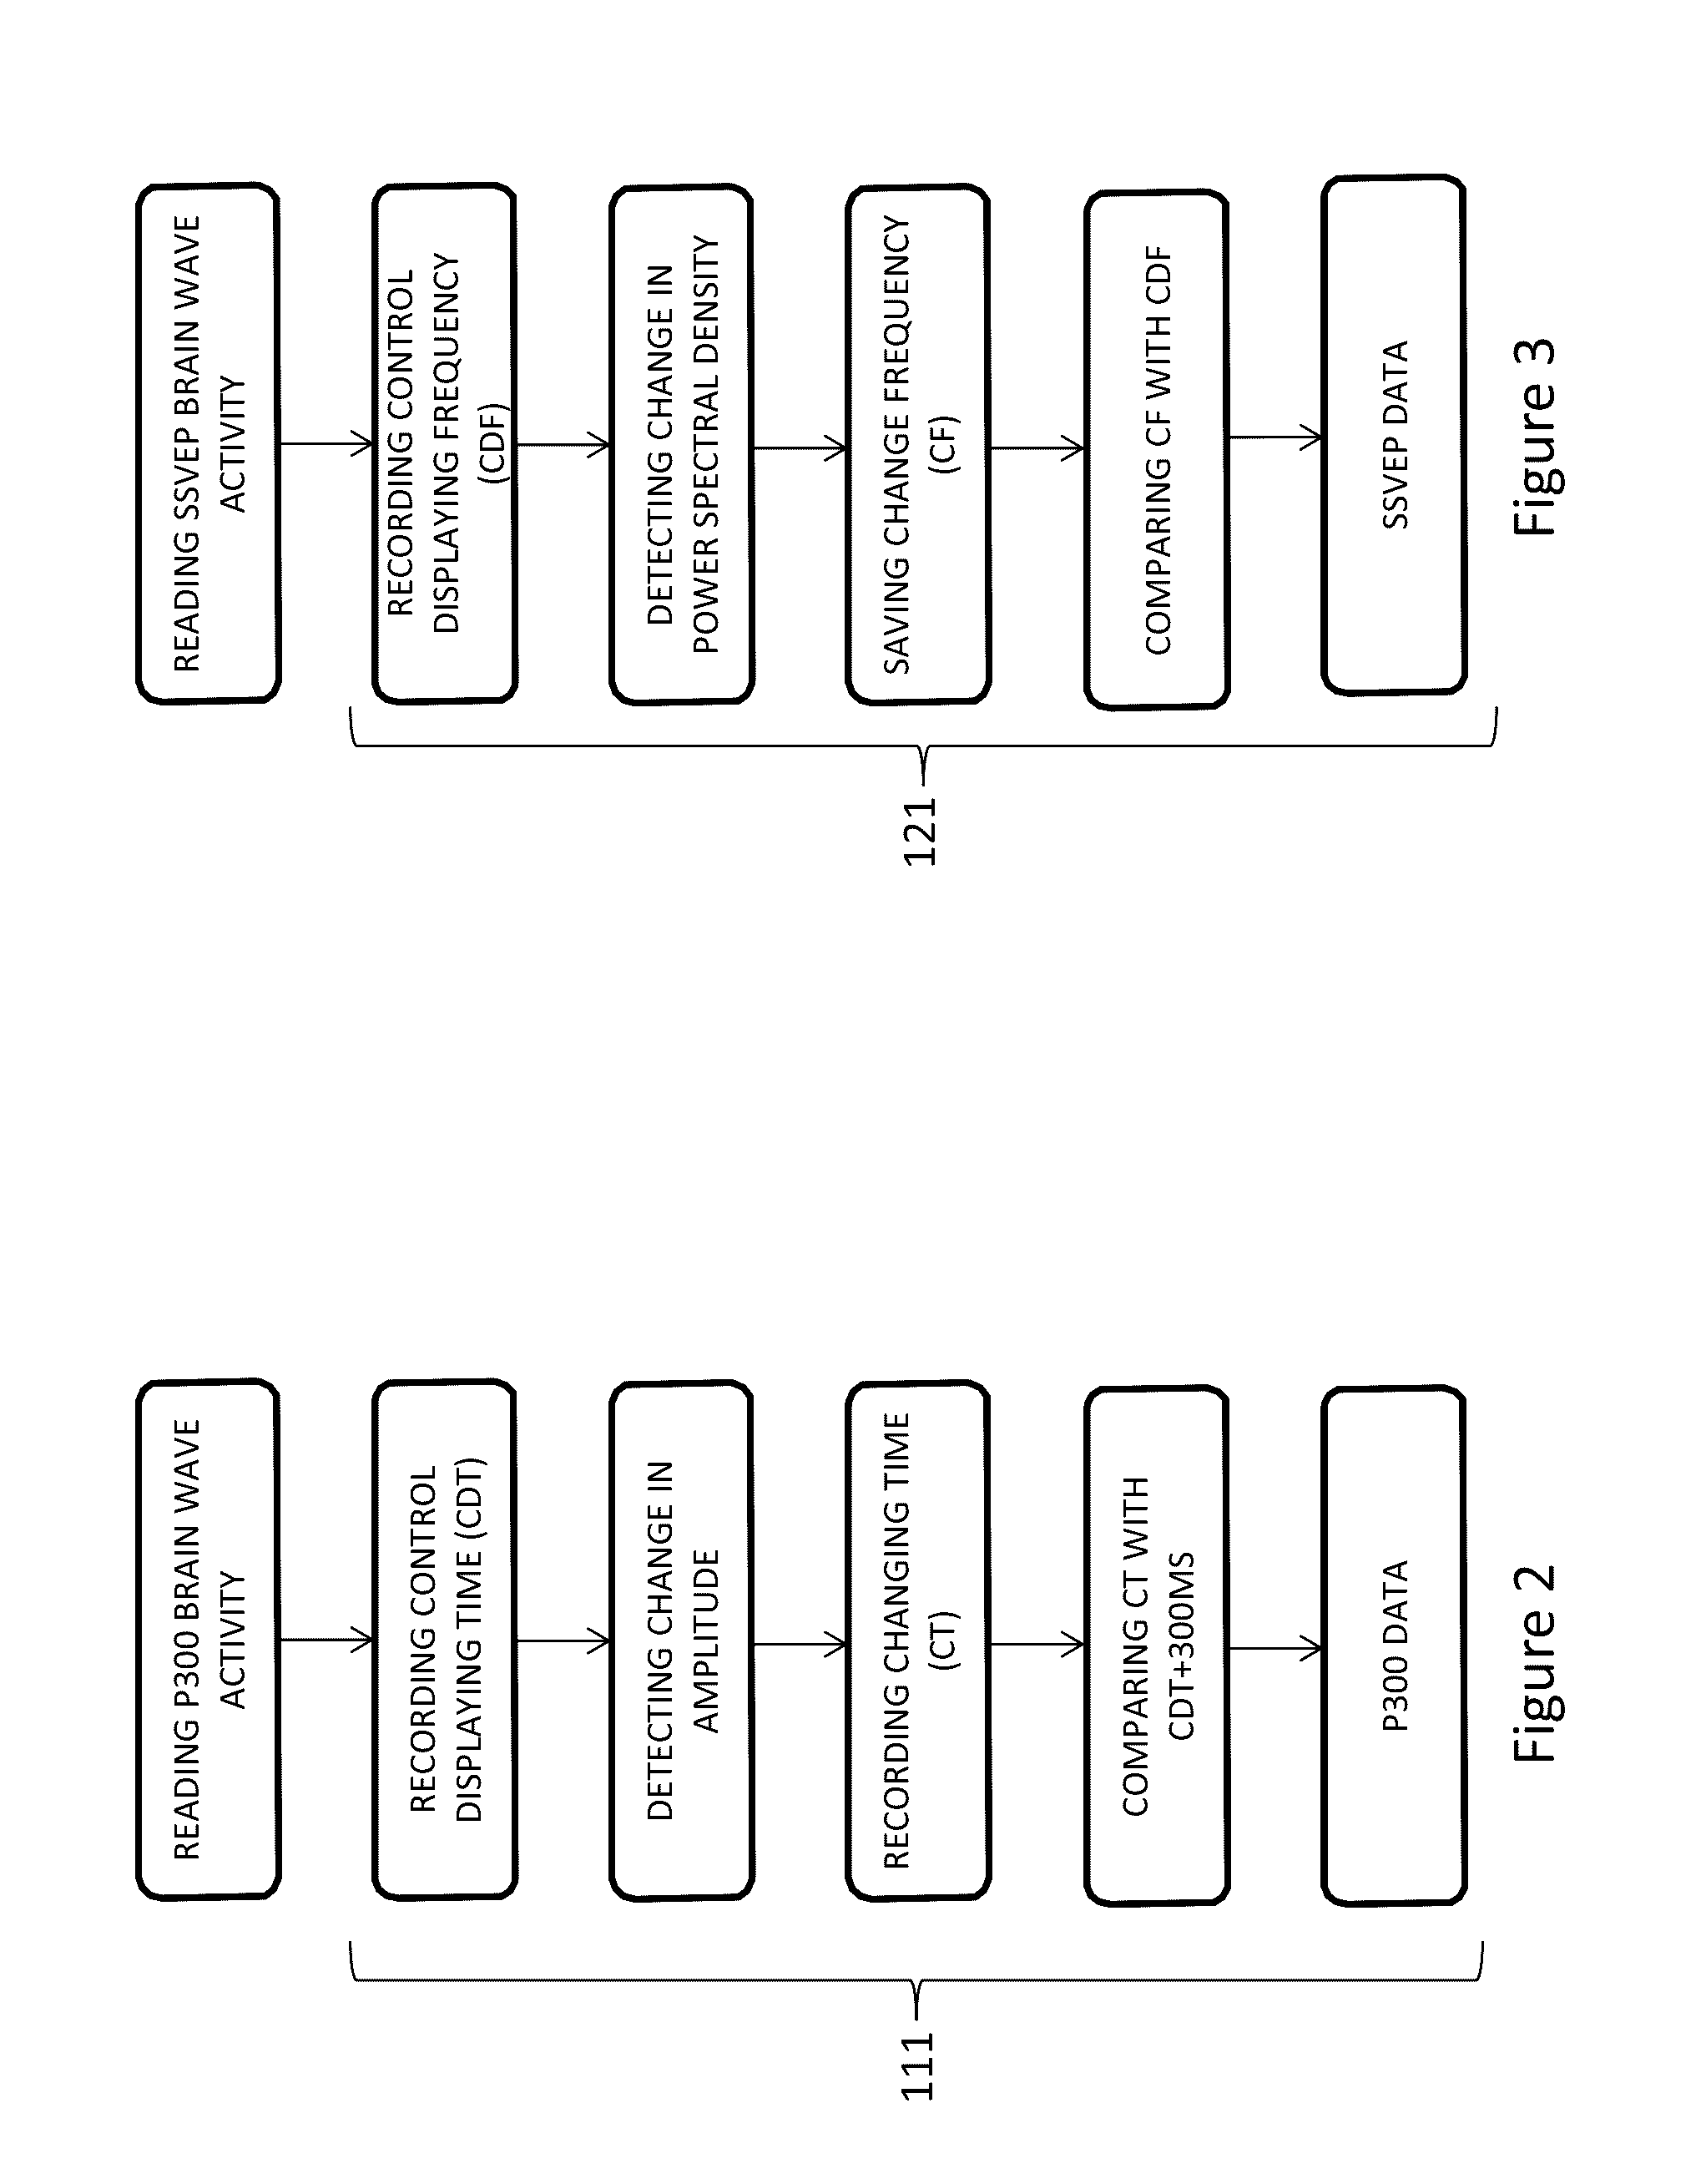 Process for controlling a mobile device